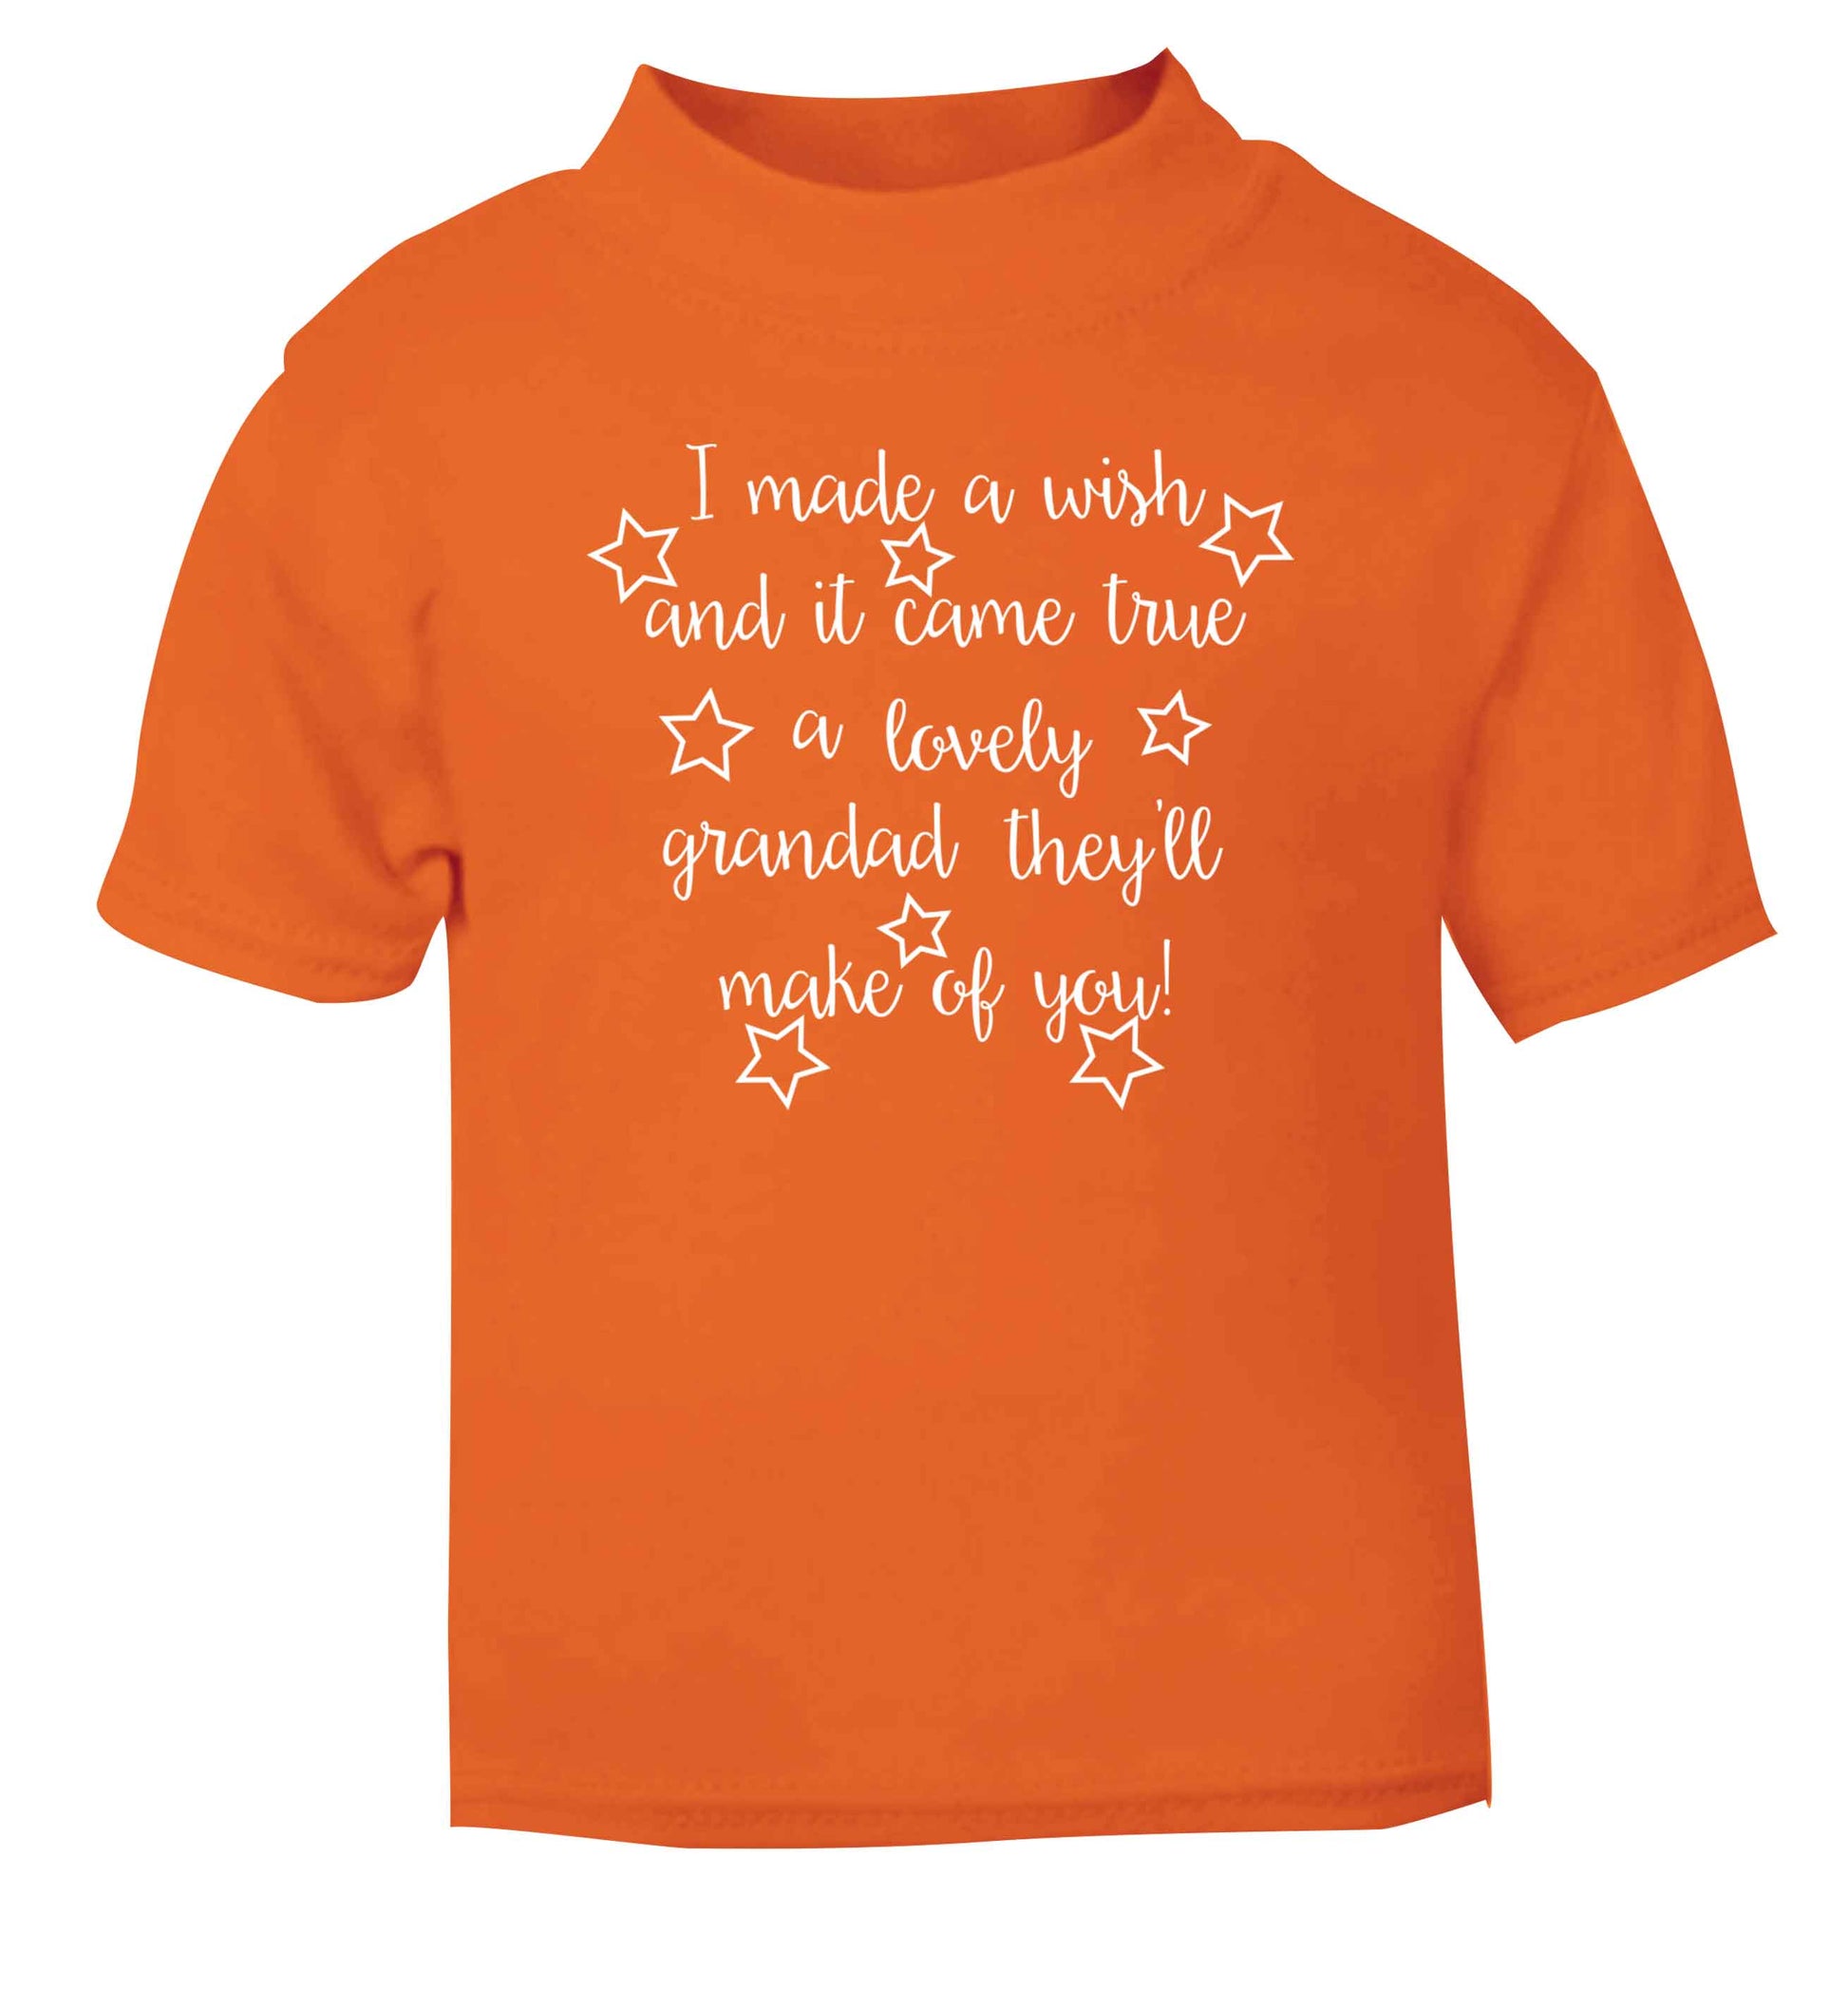 I made a wish and it came true a lovely grandad they'll make of you! orange Baby Toddler Tshirt 2 Years